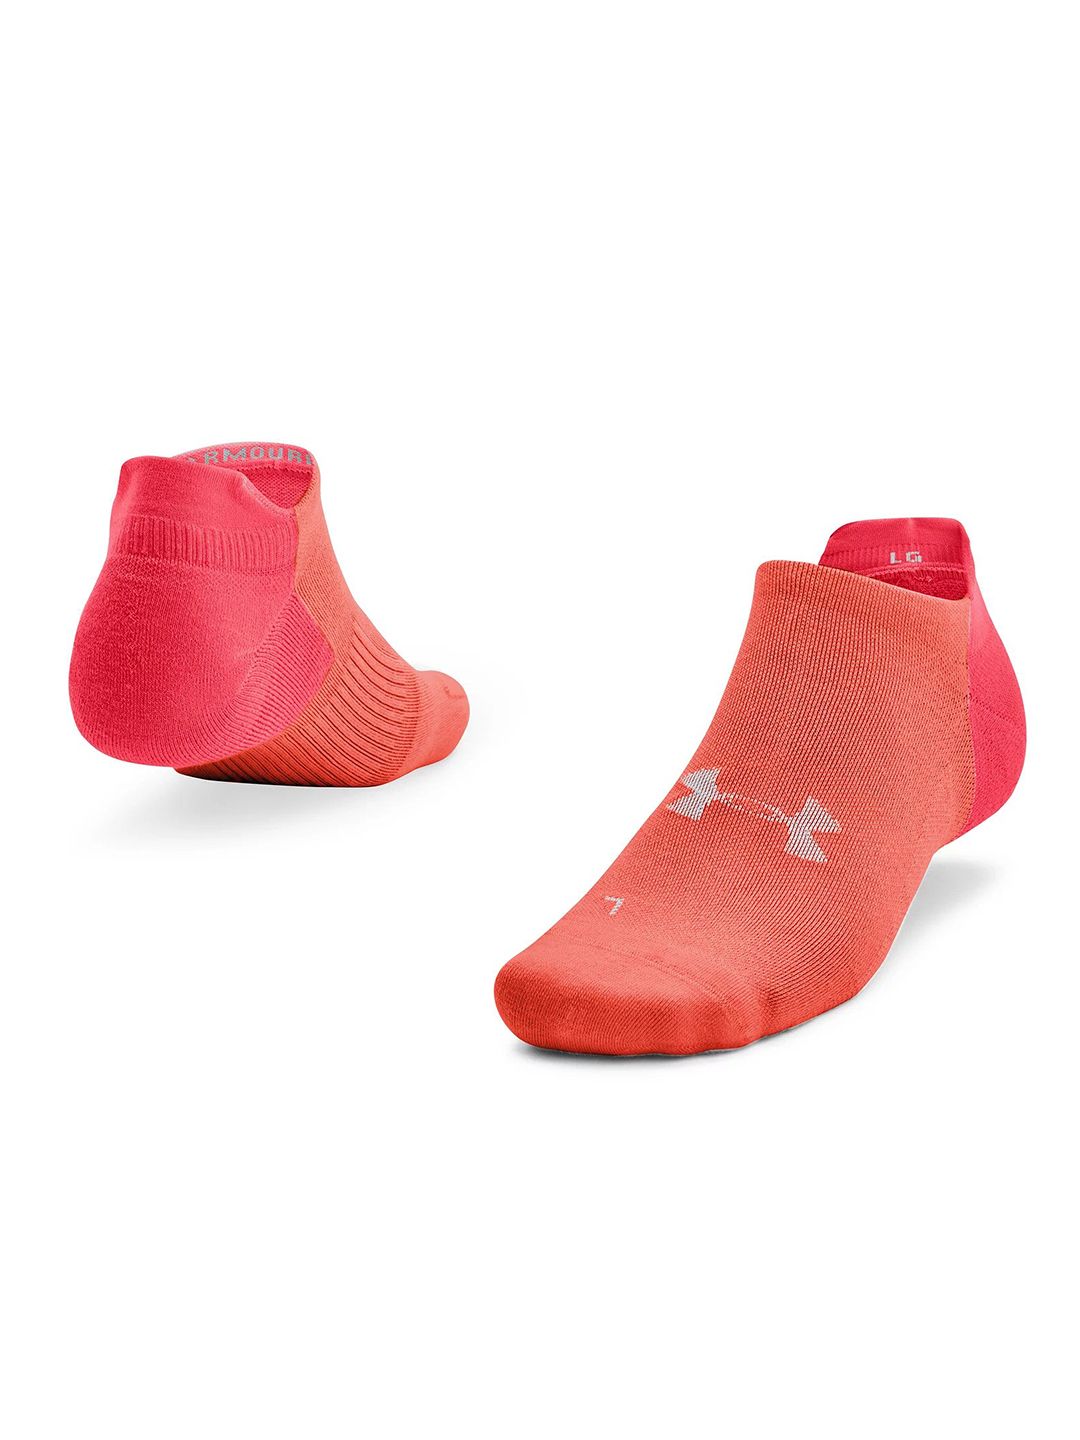 UNDER ARMOUR Unisex Coral Orange Woven Design Dry Run No Show Ankle-Length Socks Price in India